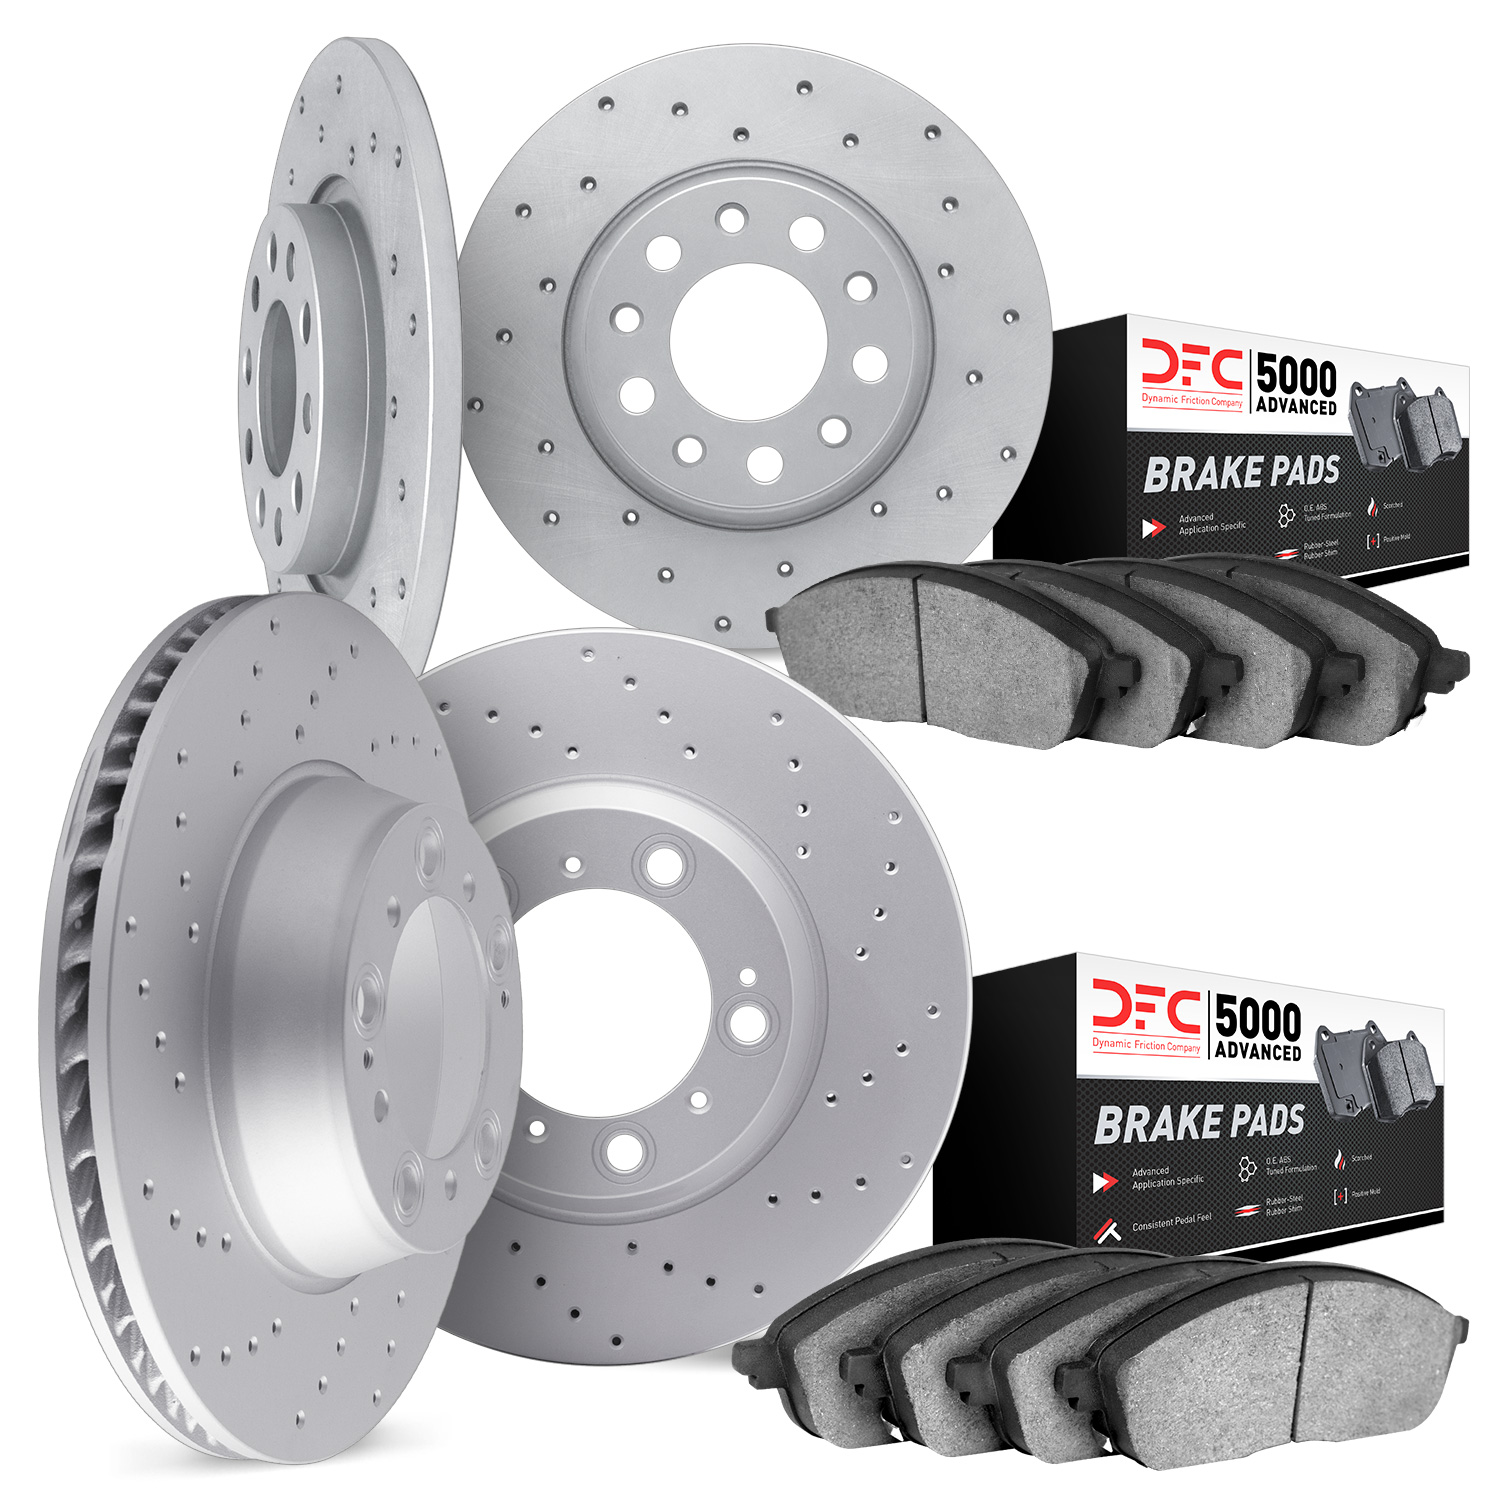 2704-13066 Geoperformance Drilled Brake Rotors with Active Performance Pads Kit, 2008-2008 Subaru, Position: Front and Rear